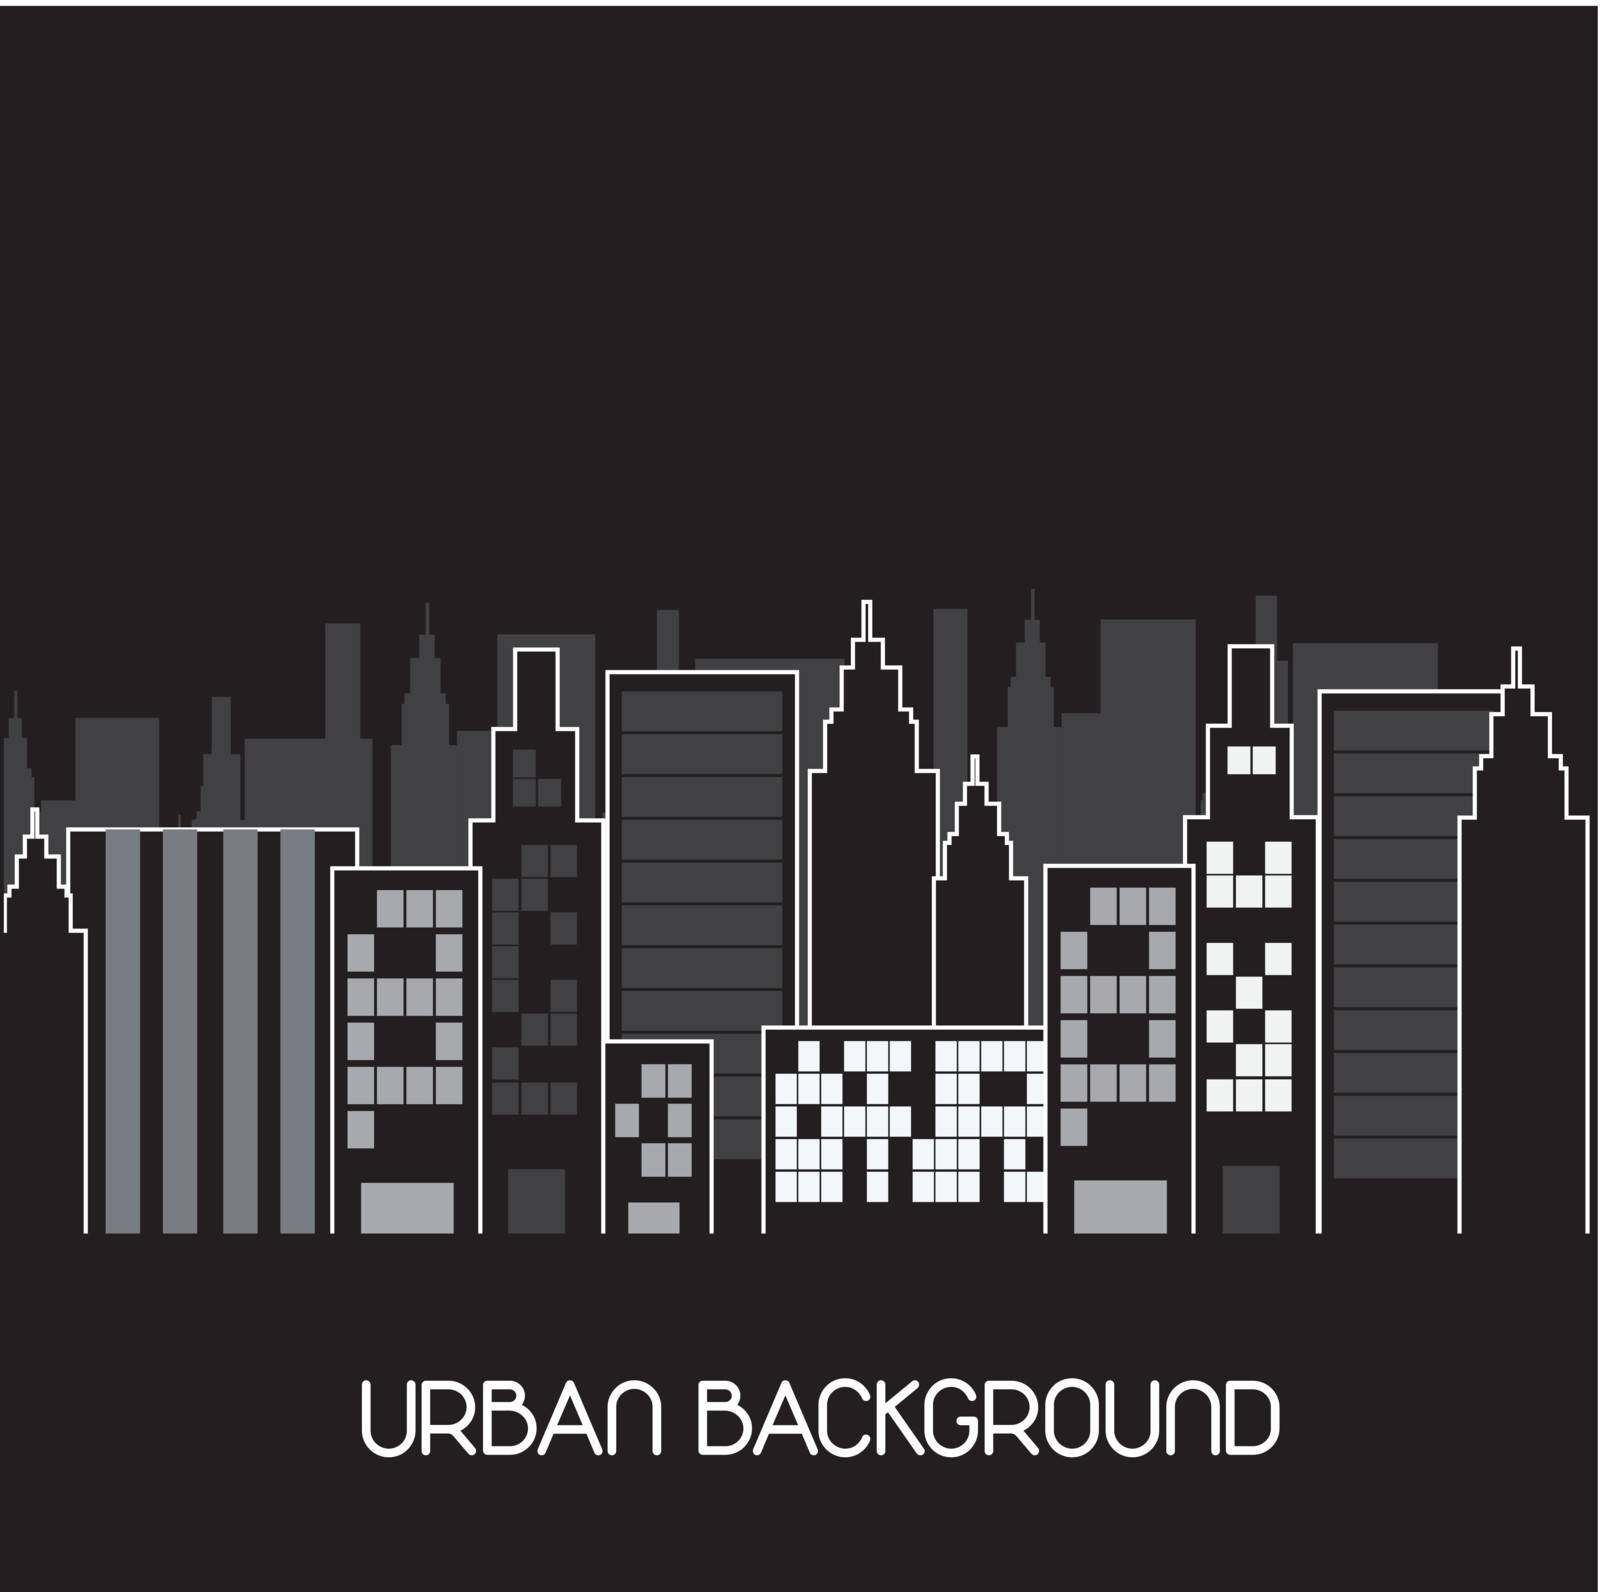 City buildings over black background